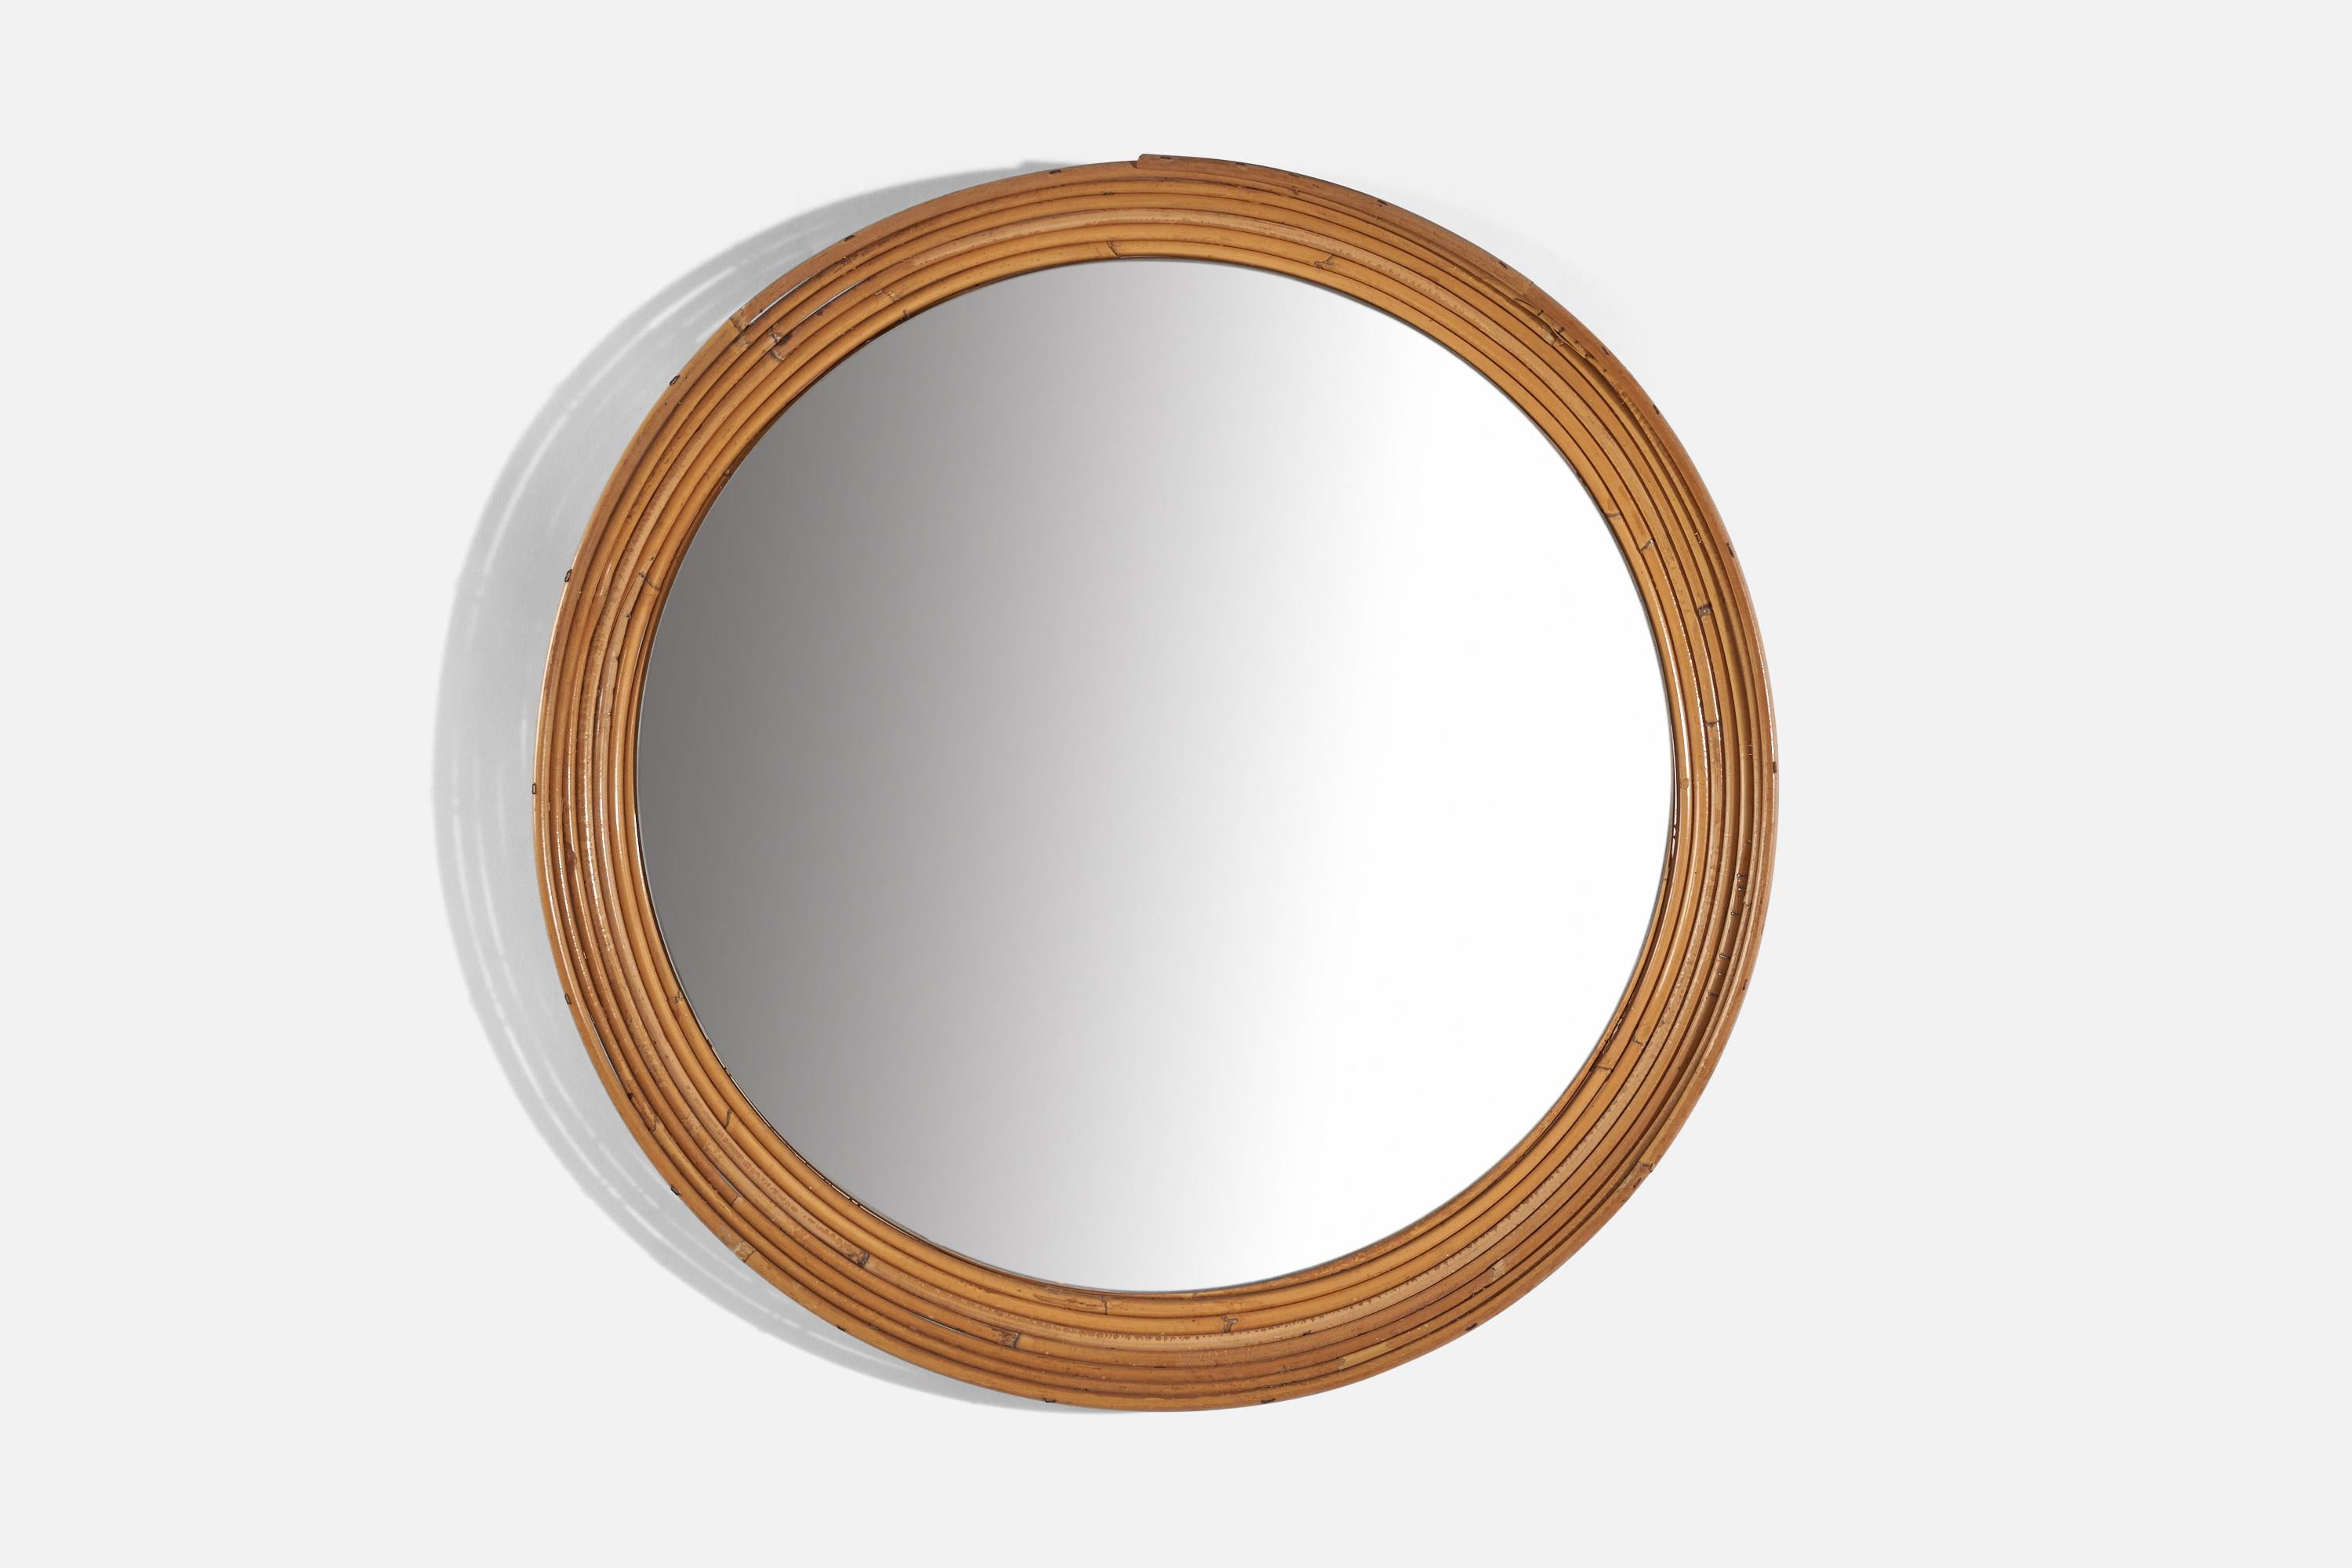 A circular, bamboo wall mirror designed and produced in Italy, c. 1950s.
 